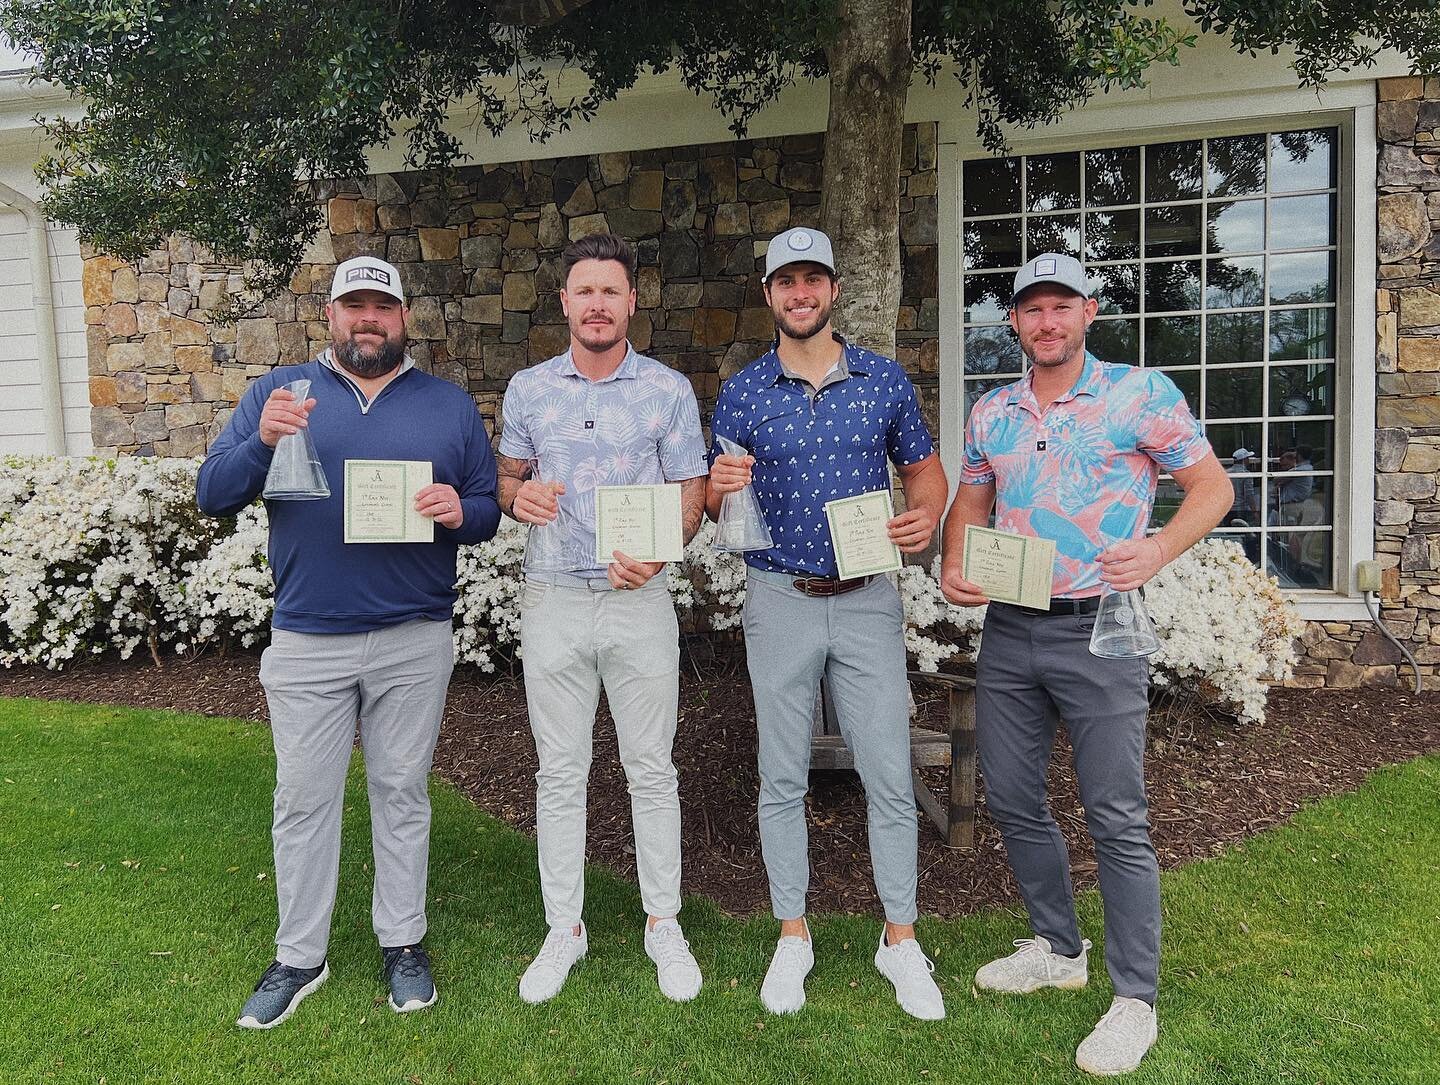 Way to go Team ISG!!! The ISG team went out today to support the Children&rsquo;s Heart Foundation (@thechf) at Children&rsquo;s Heart Classic and took home first place!!! What an awesome day for an even better cause! Congratulations guys! 🏌🏼&zwj;♂